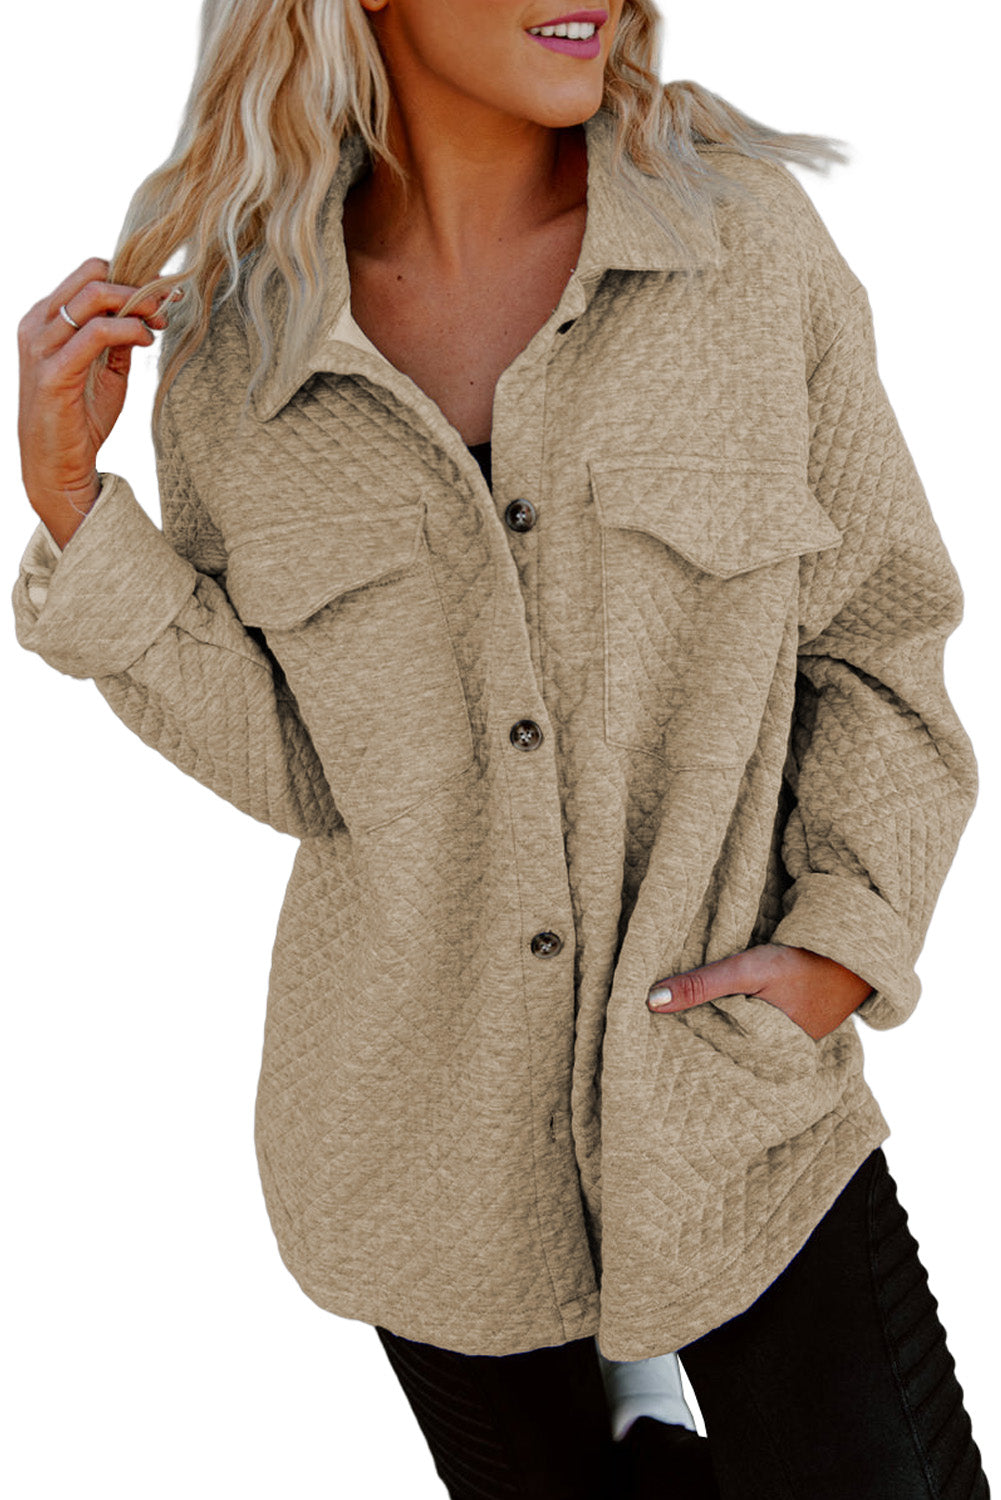 - Retro Quilted Flap Pocket Button Shacket - 4 colors - women's shacket at TFC&H Co.